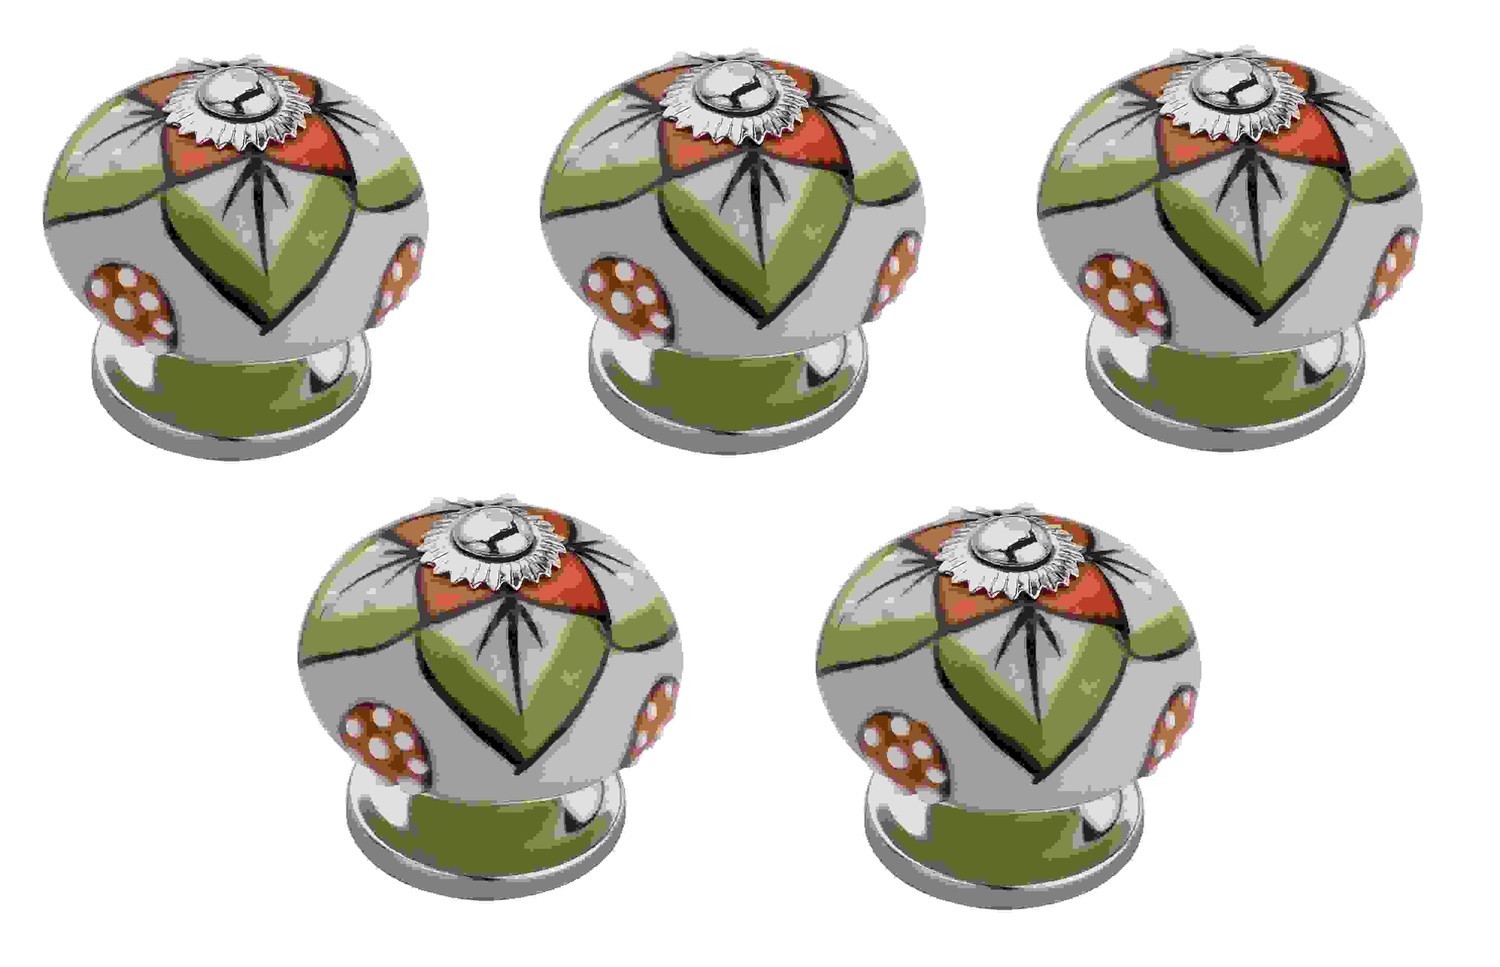 Admiral 1-3/5 in. (41mm) White & Multicolor Cabinet Knob (Pack of 5)